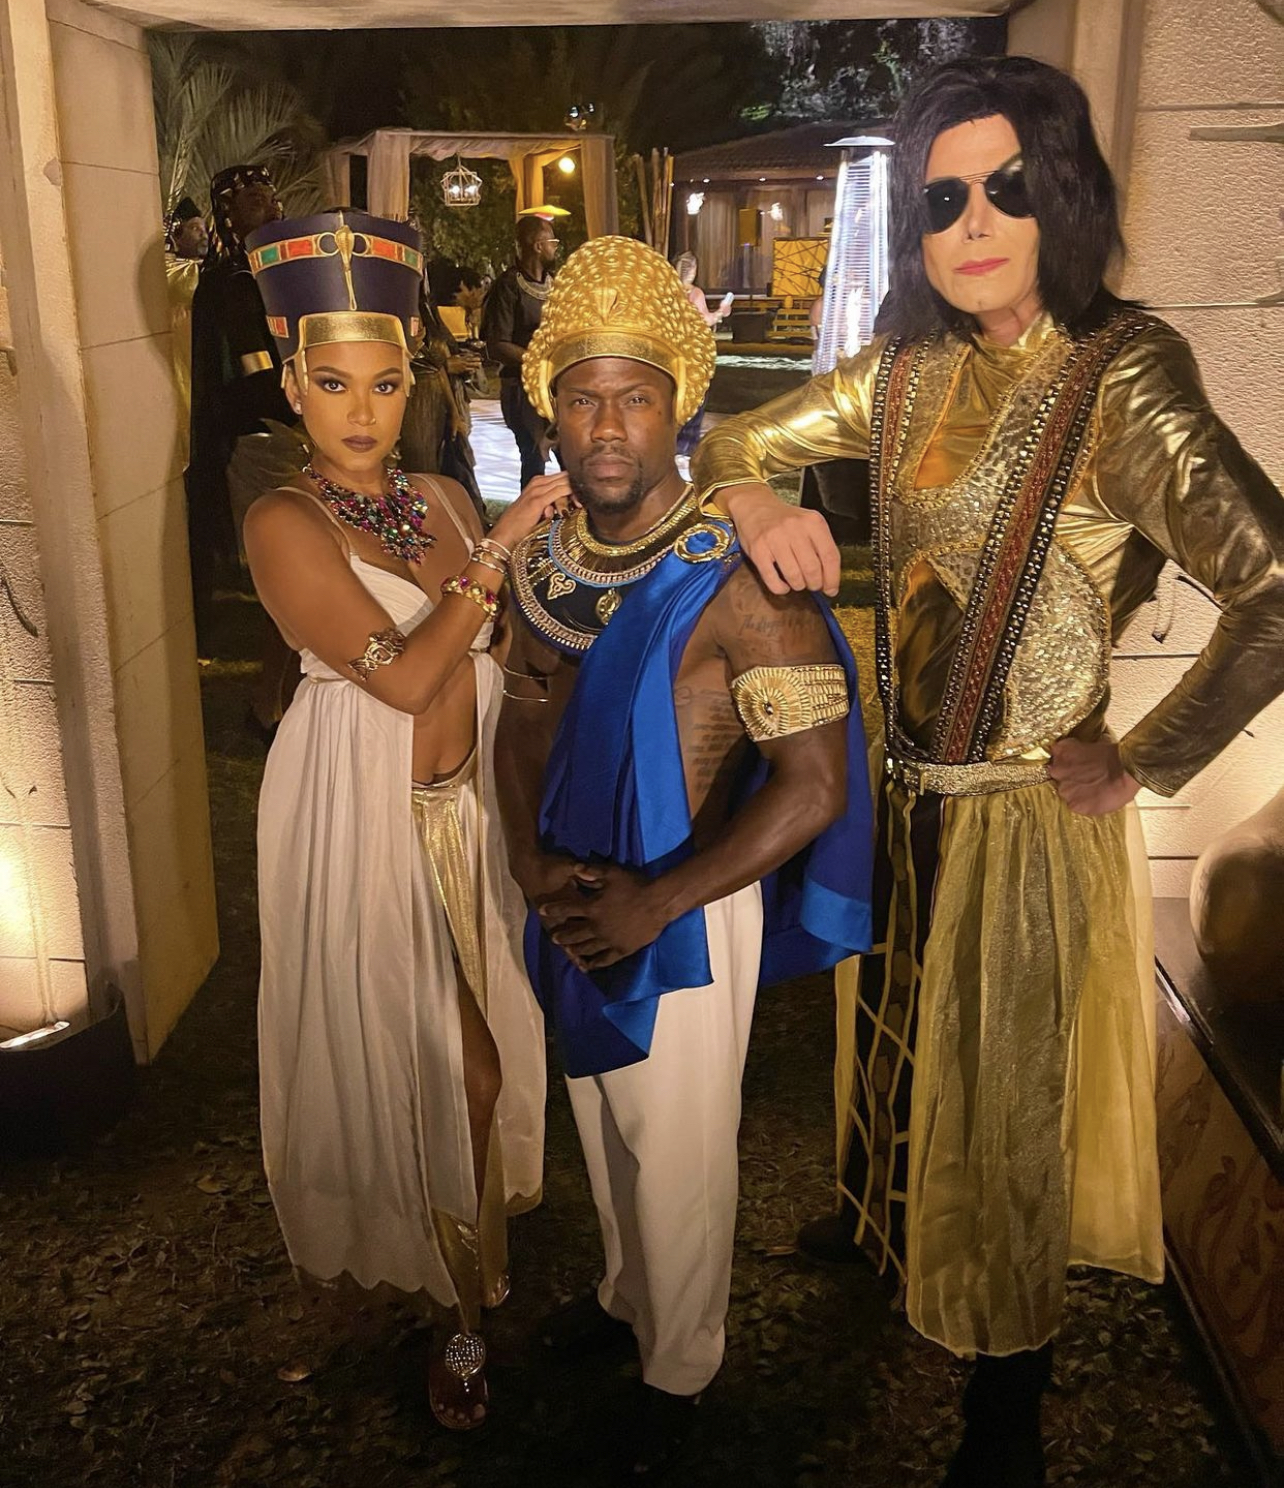 Top 10 Best Celebrity Halloween 2021 Costumes: Kevin and Eniko